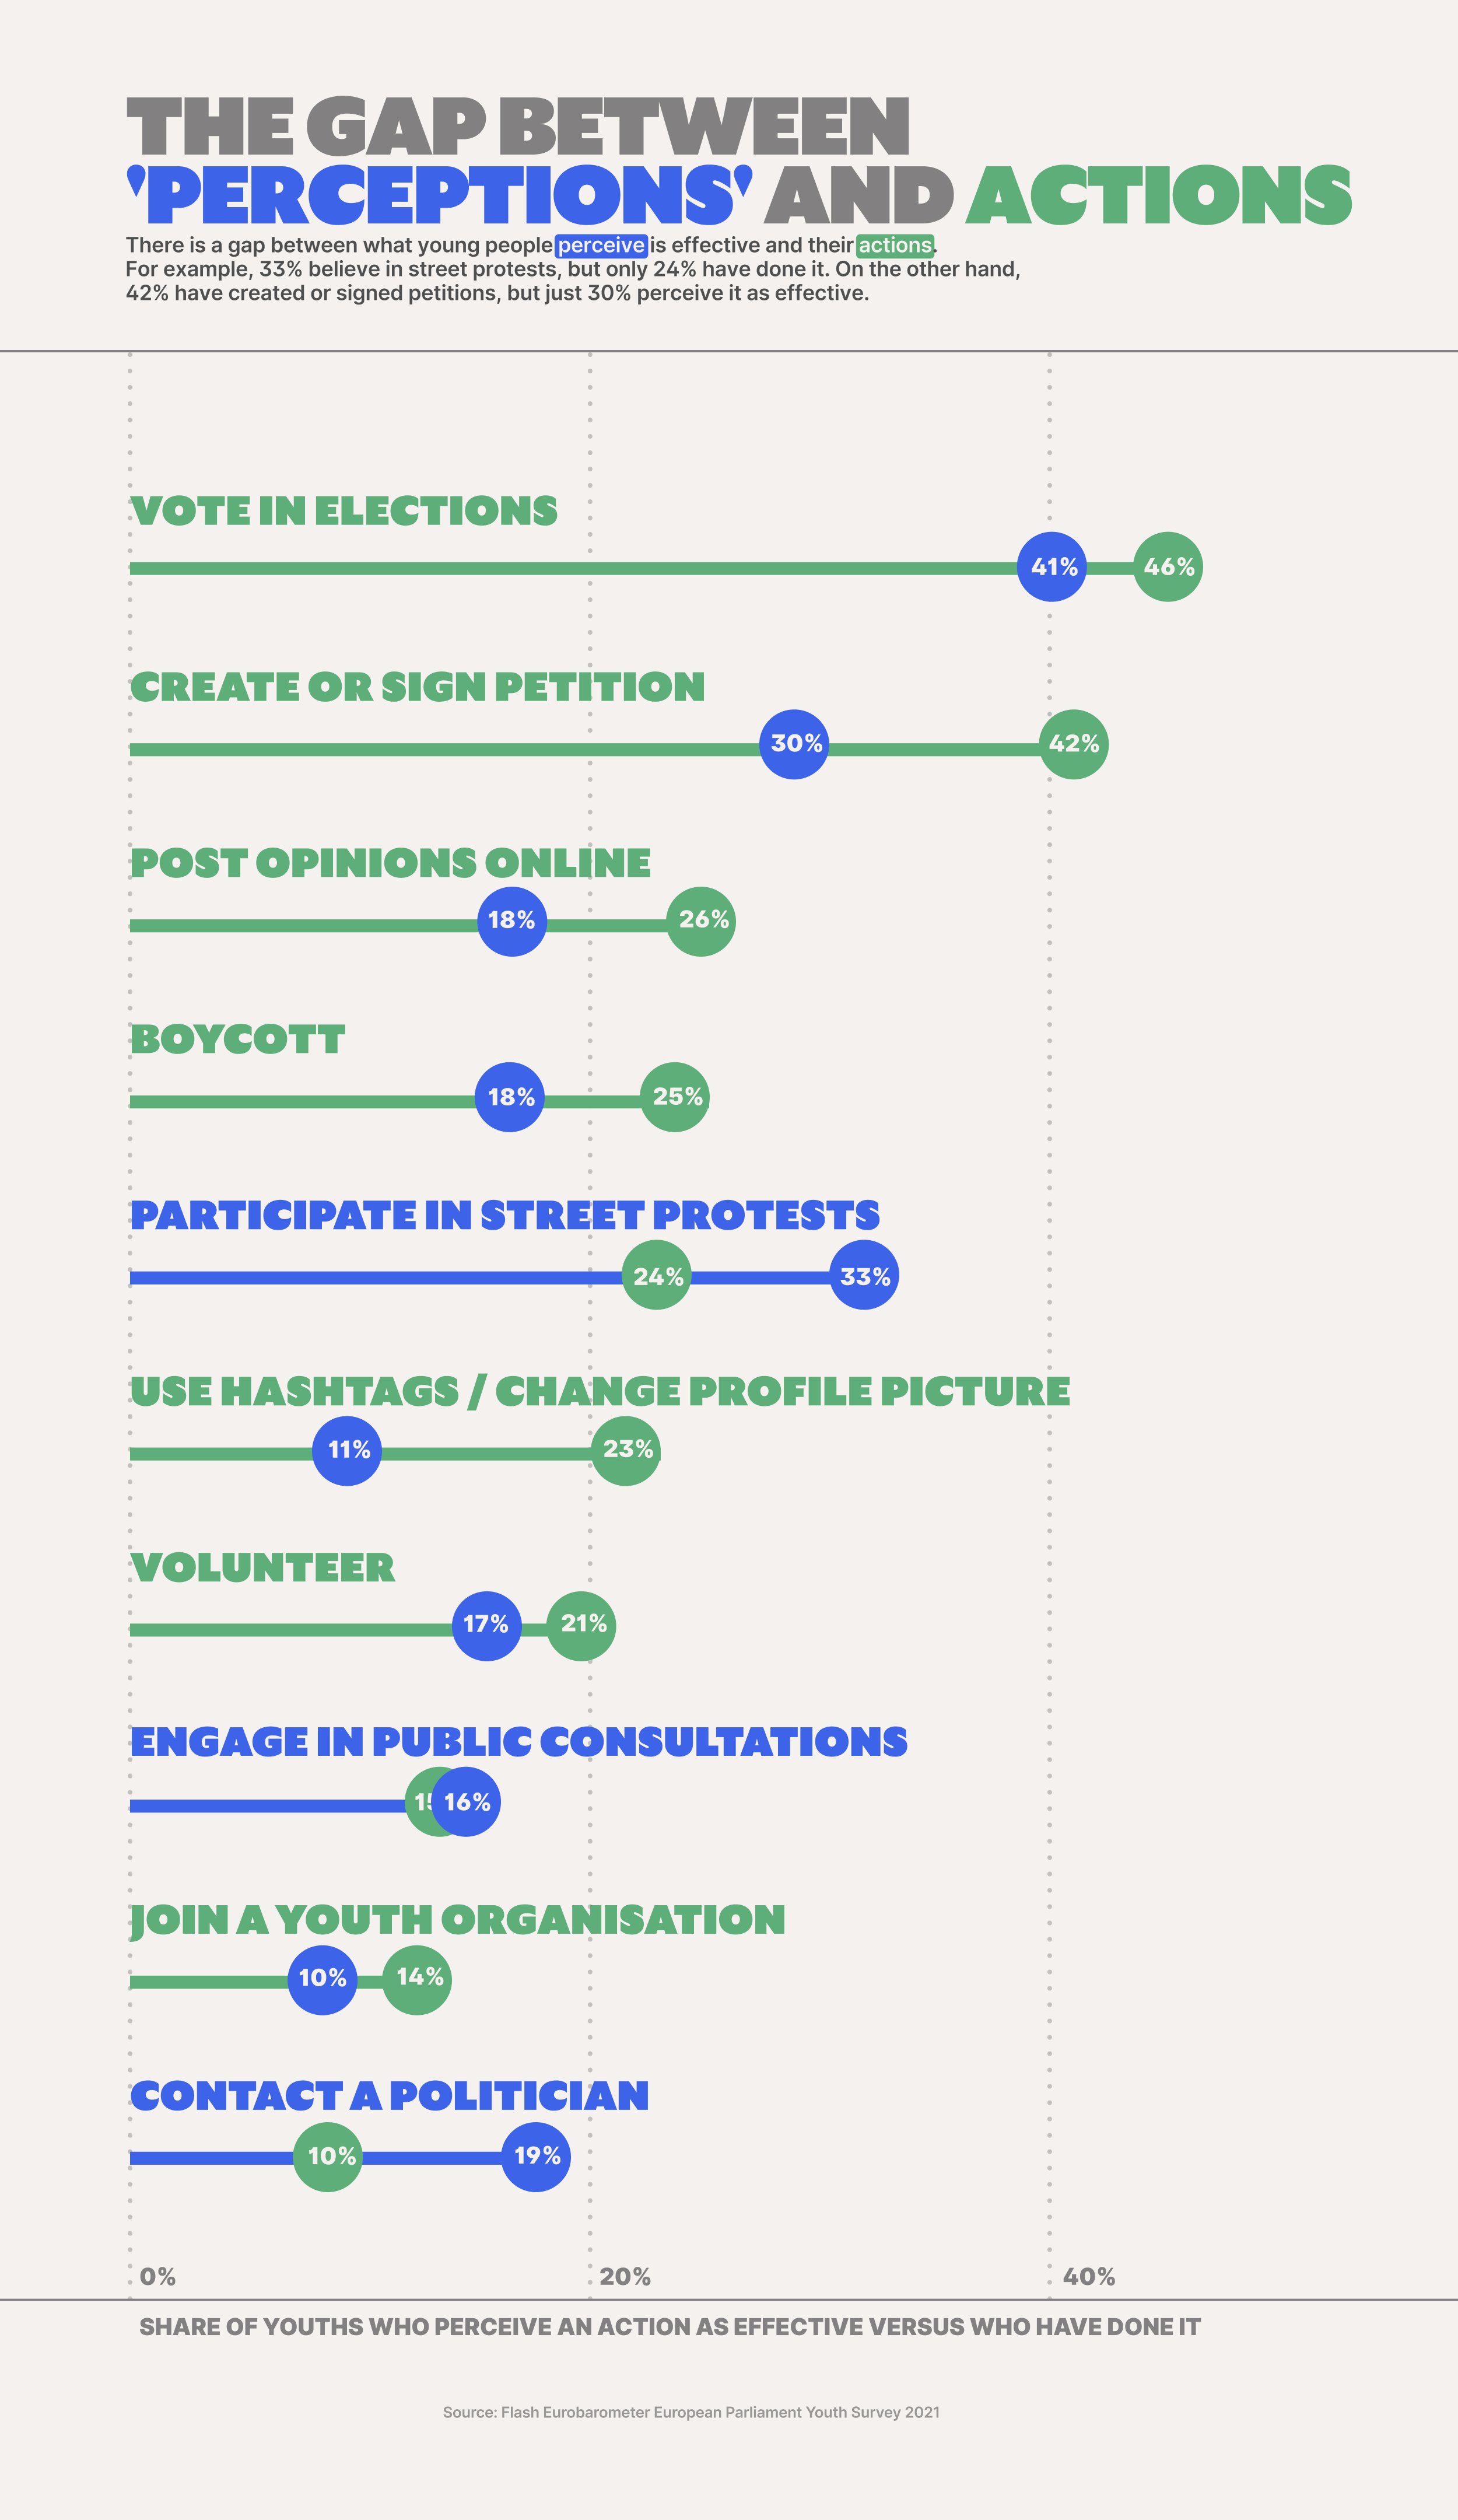 Comparison between what actions youth have taken to be heard versus which activities they perceive as effective